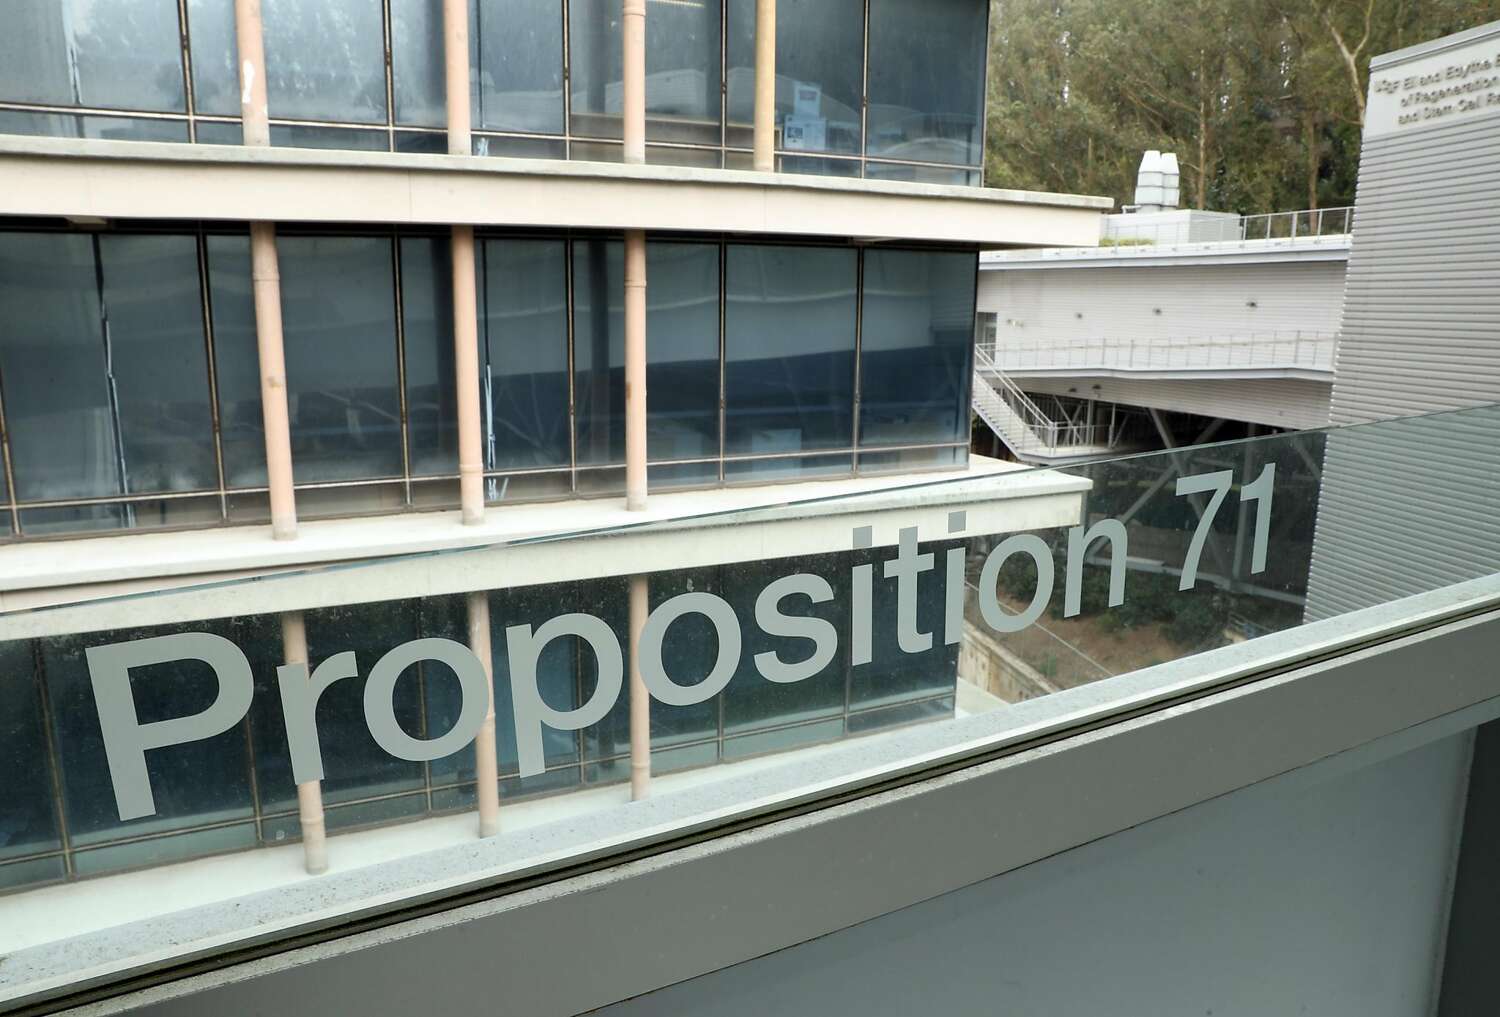 A “Proposition 71” sign at UCSF’s stem cell building